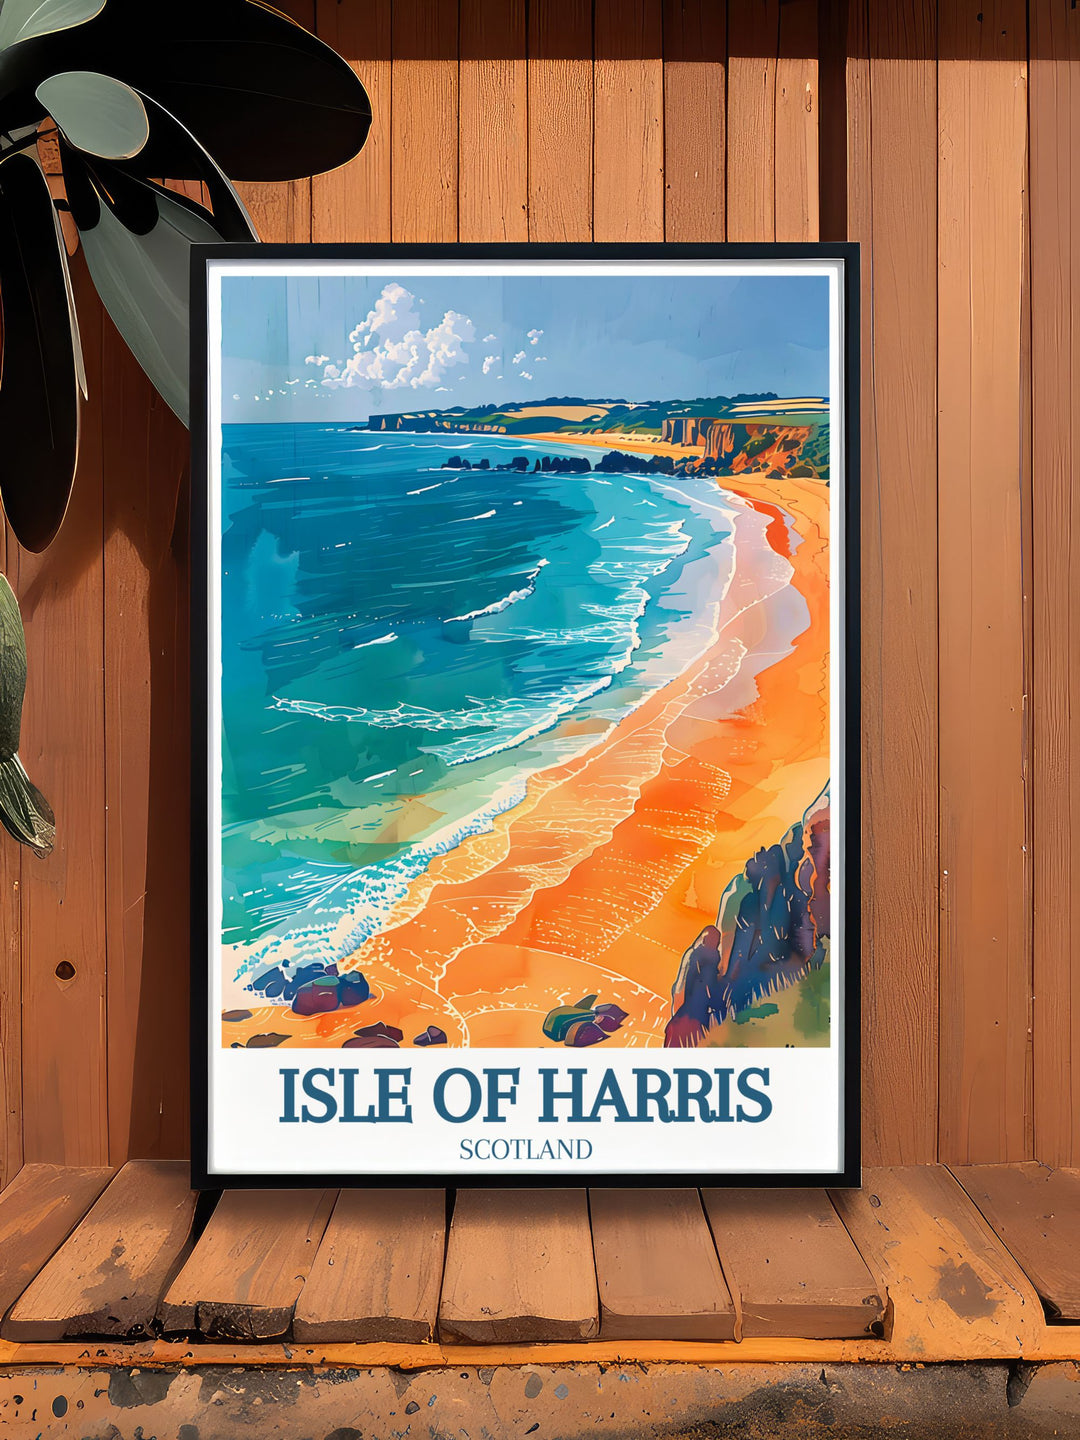 Framed art featuring Luskentyre Beach, highlighting its expansive sandy shores and stunning coastal views, bringing a touch of Scottish charm to your decor.